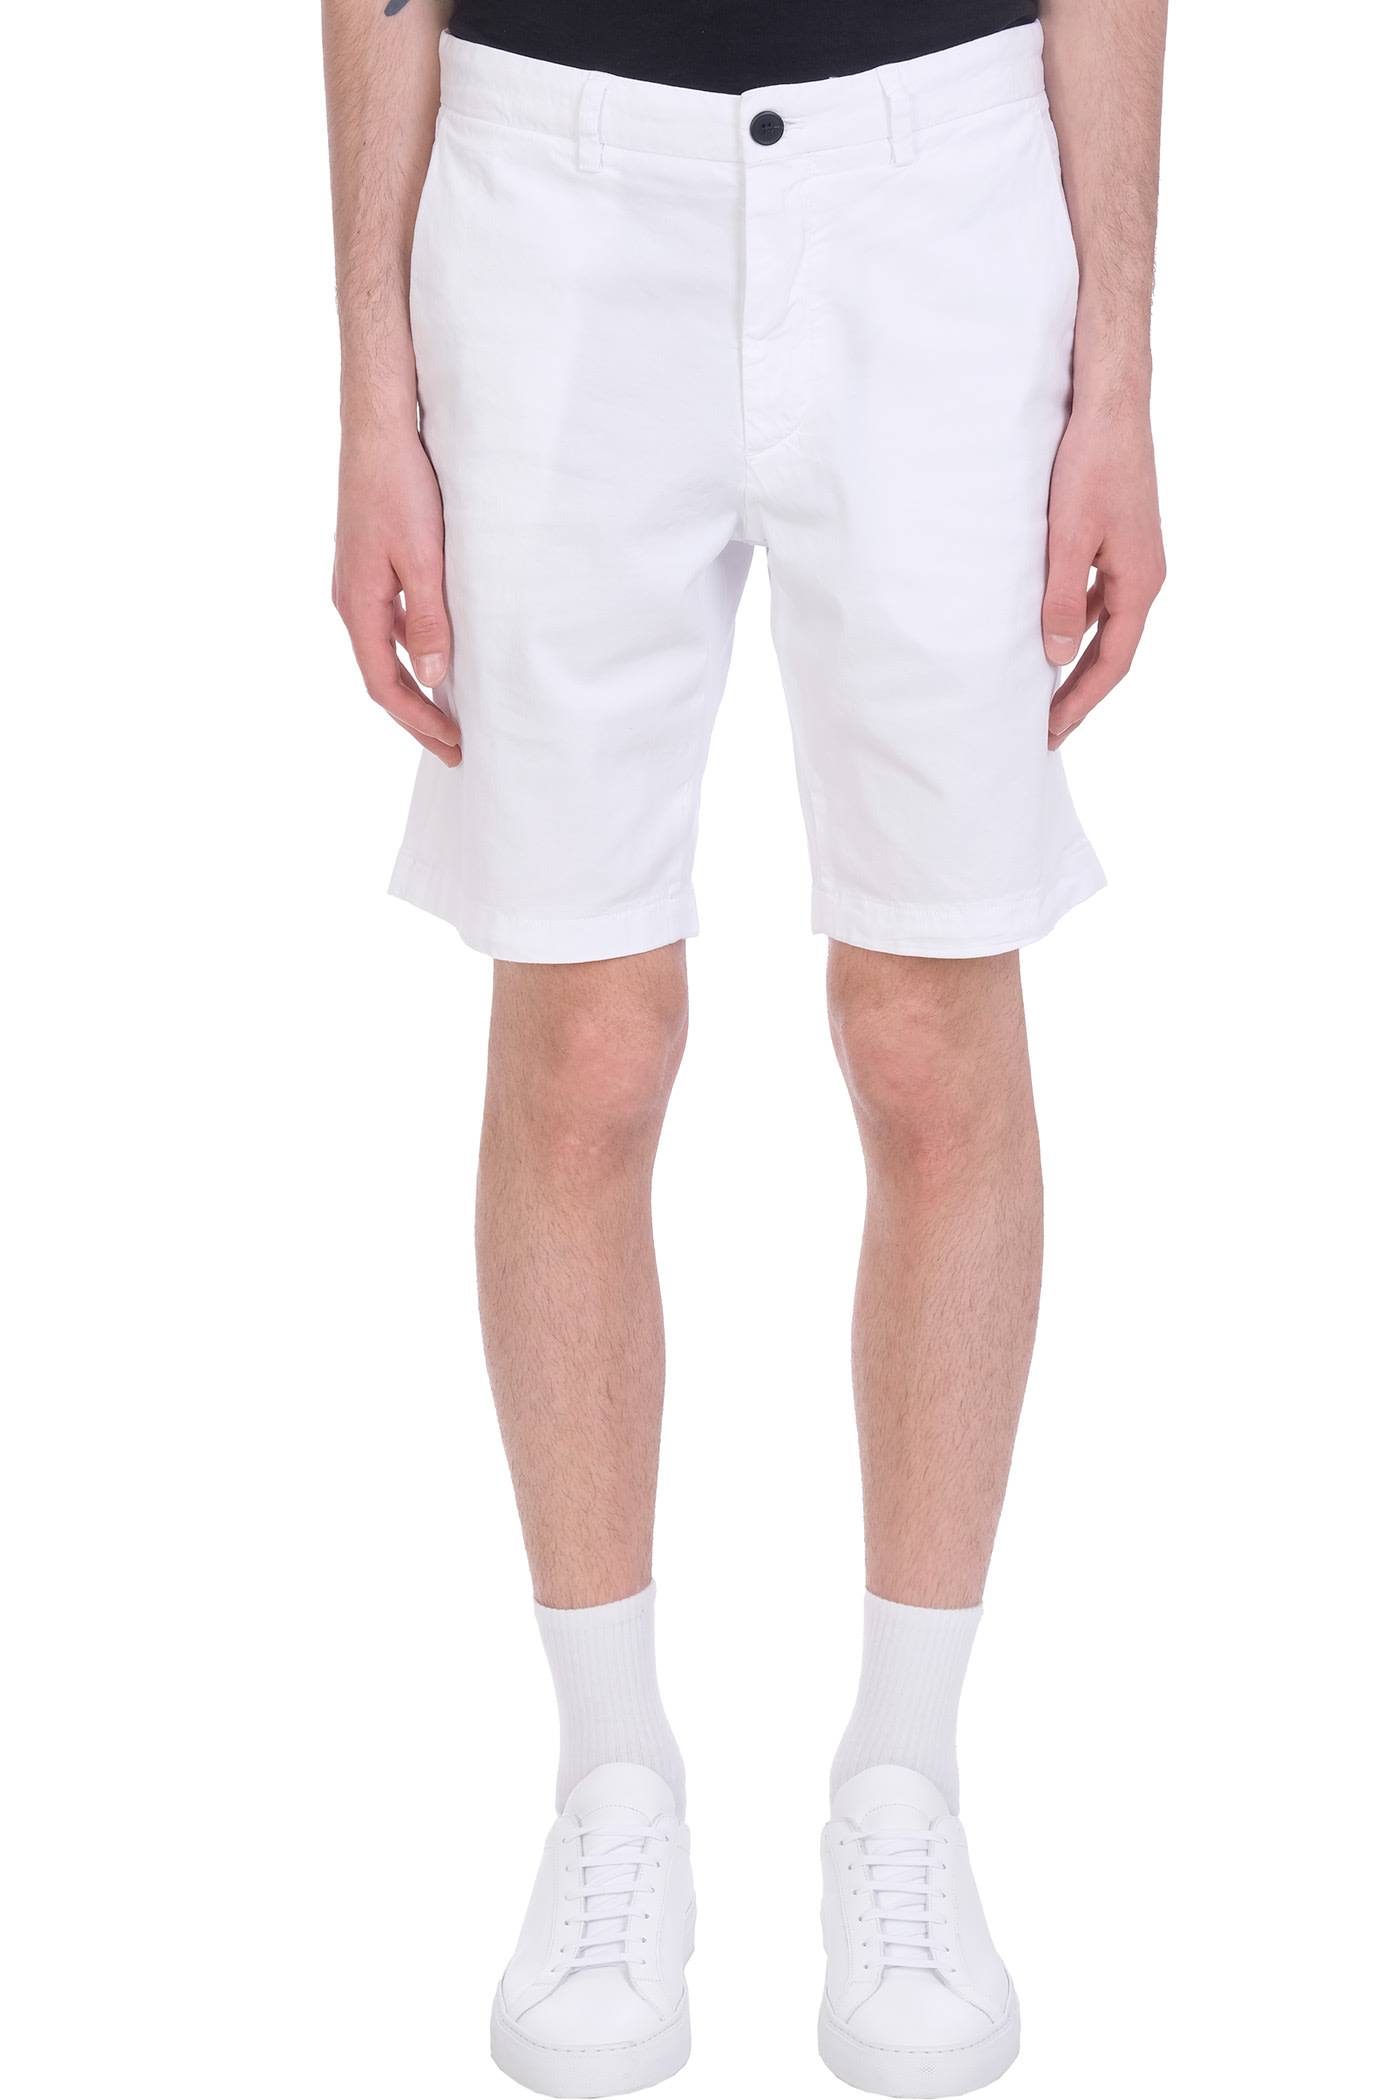 Theory Shorts In White Cotton